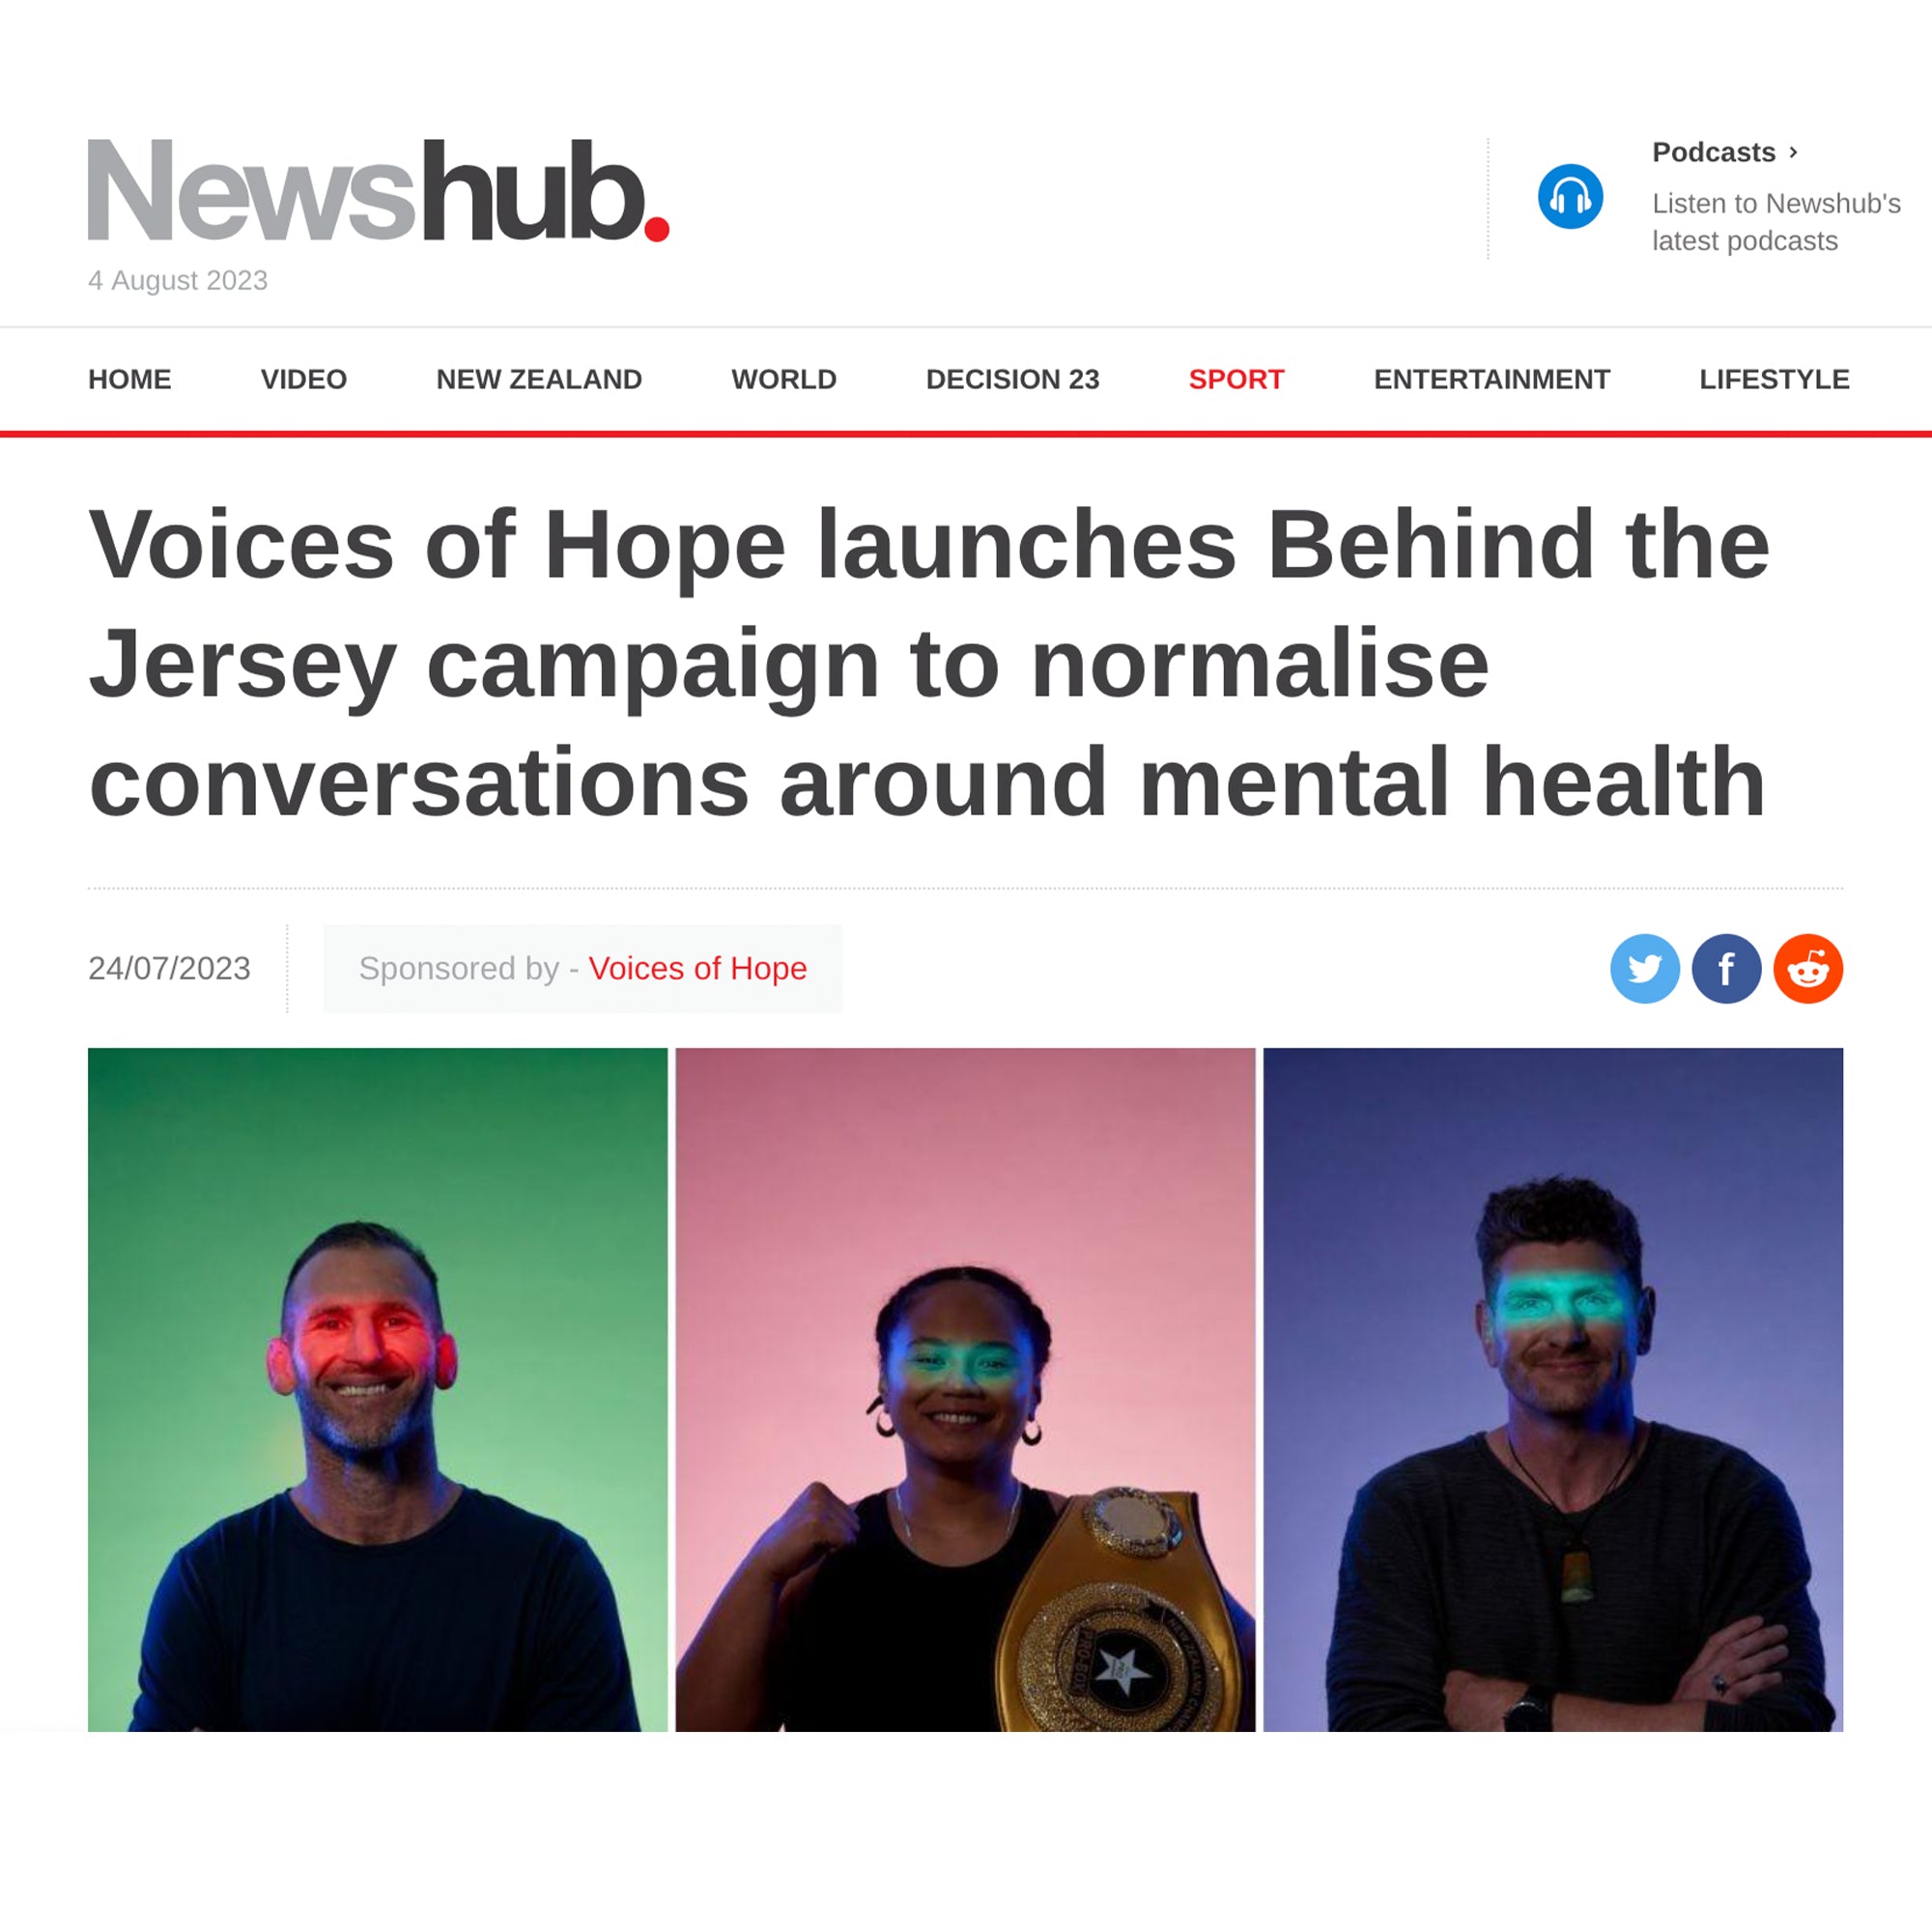 Voices of Hope launches Behind the Jersey campaign to normalise conversations around mental health